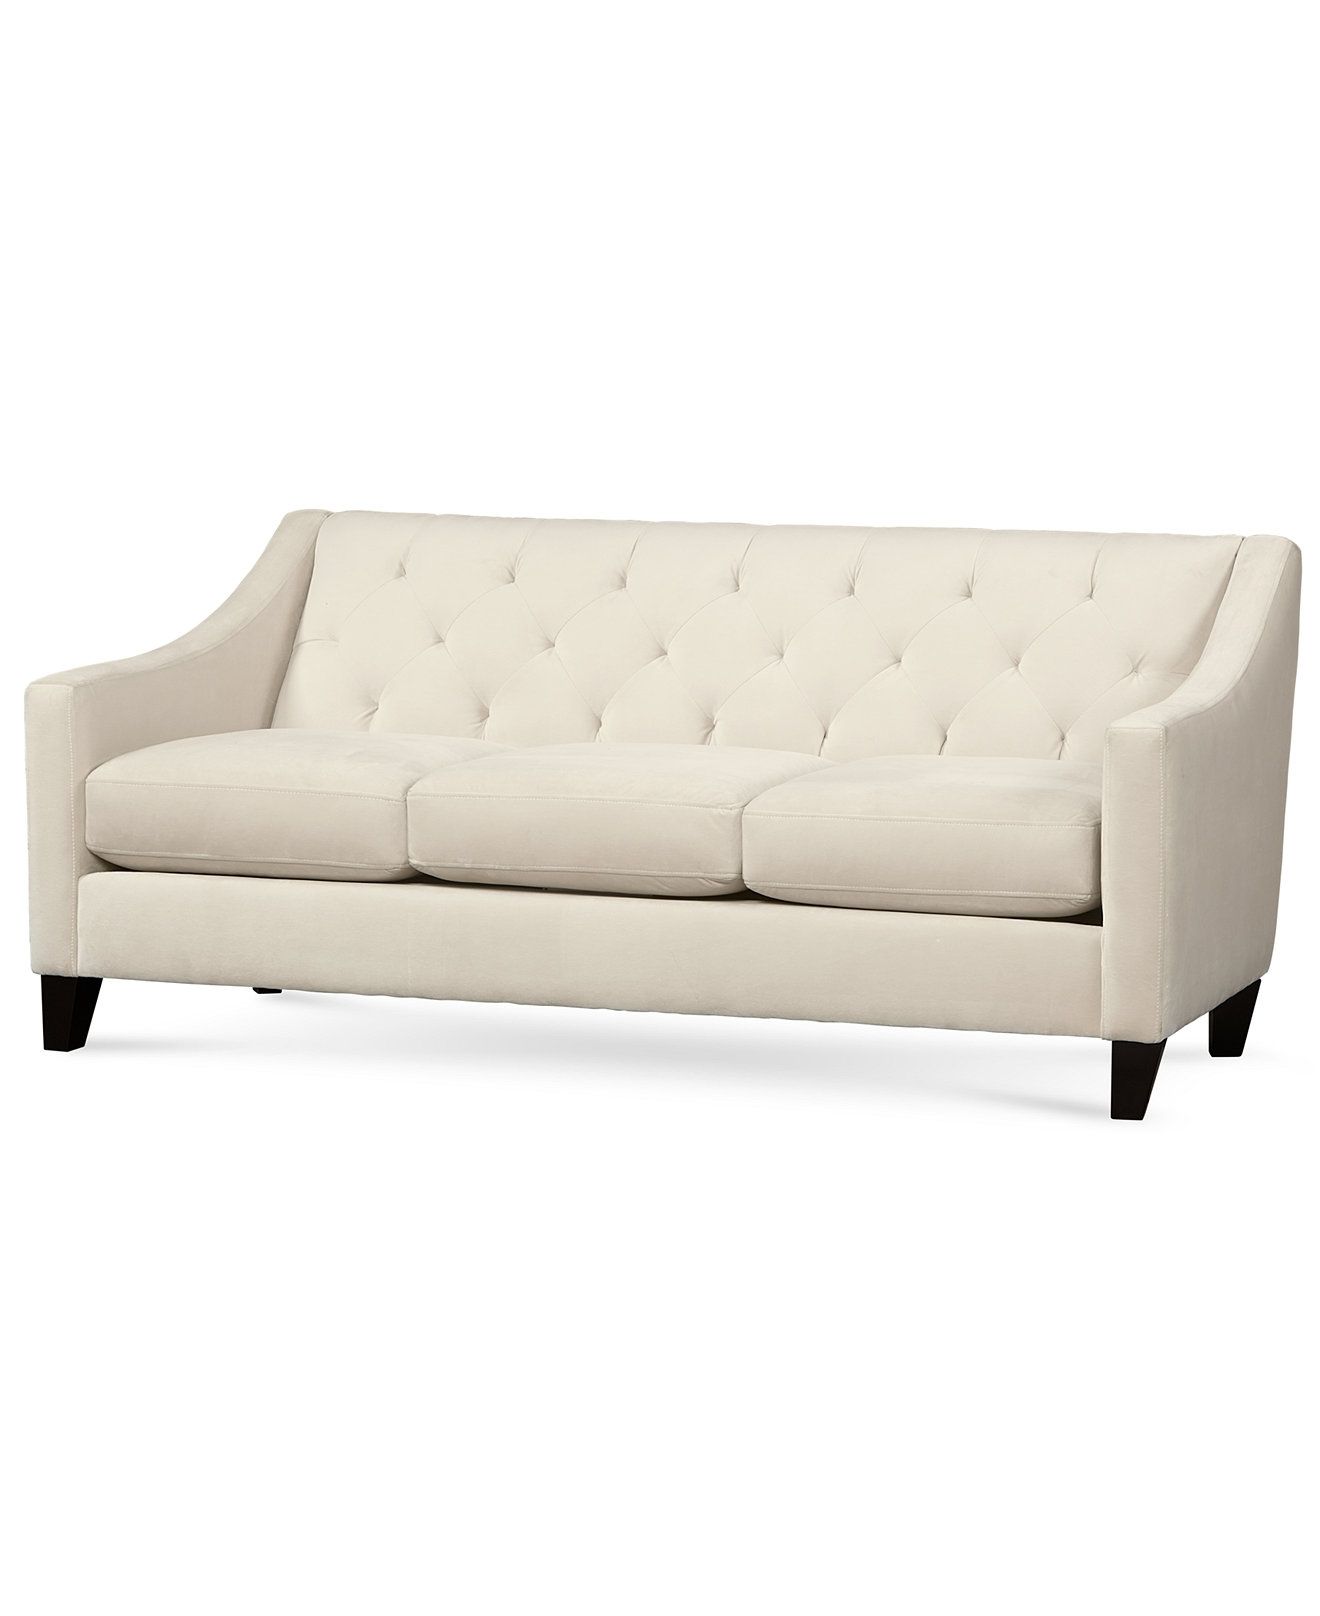 Macys Sofas For Fashionable Sofas : Apartment Couch Sofas For Small Spaces Grey Velvet Sofa (View 3 of 20)